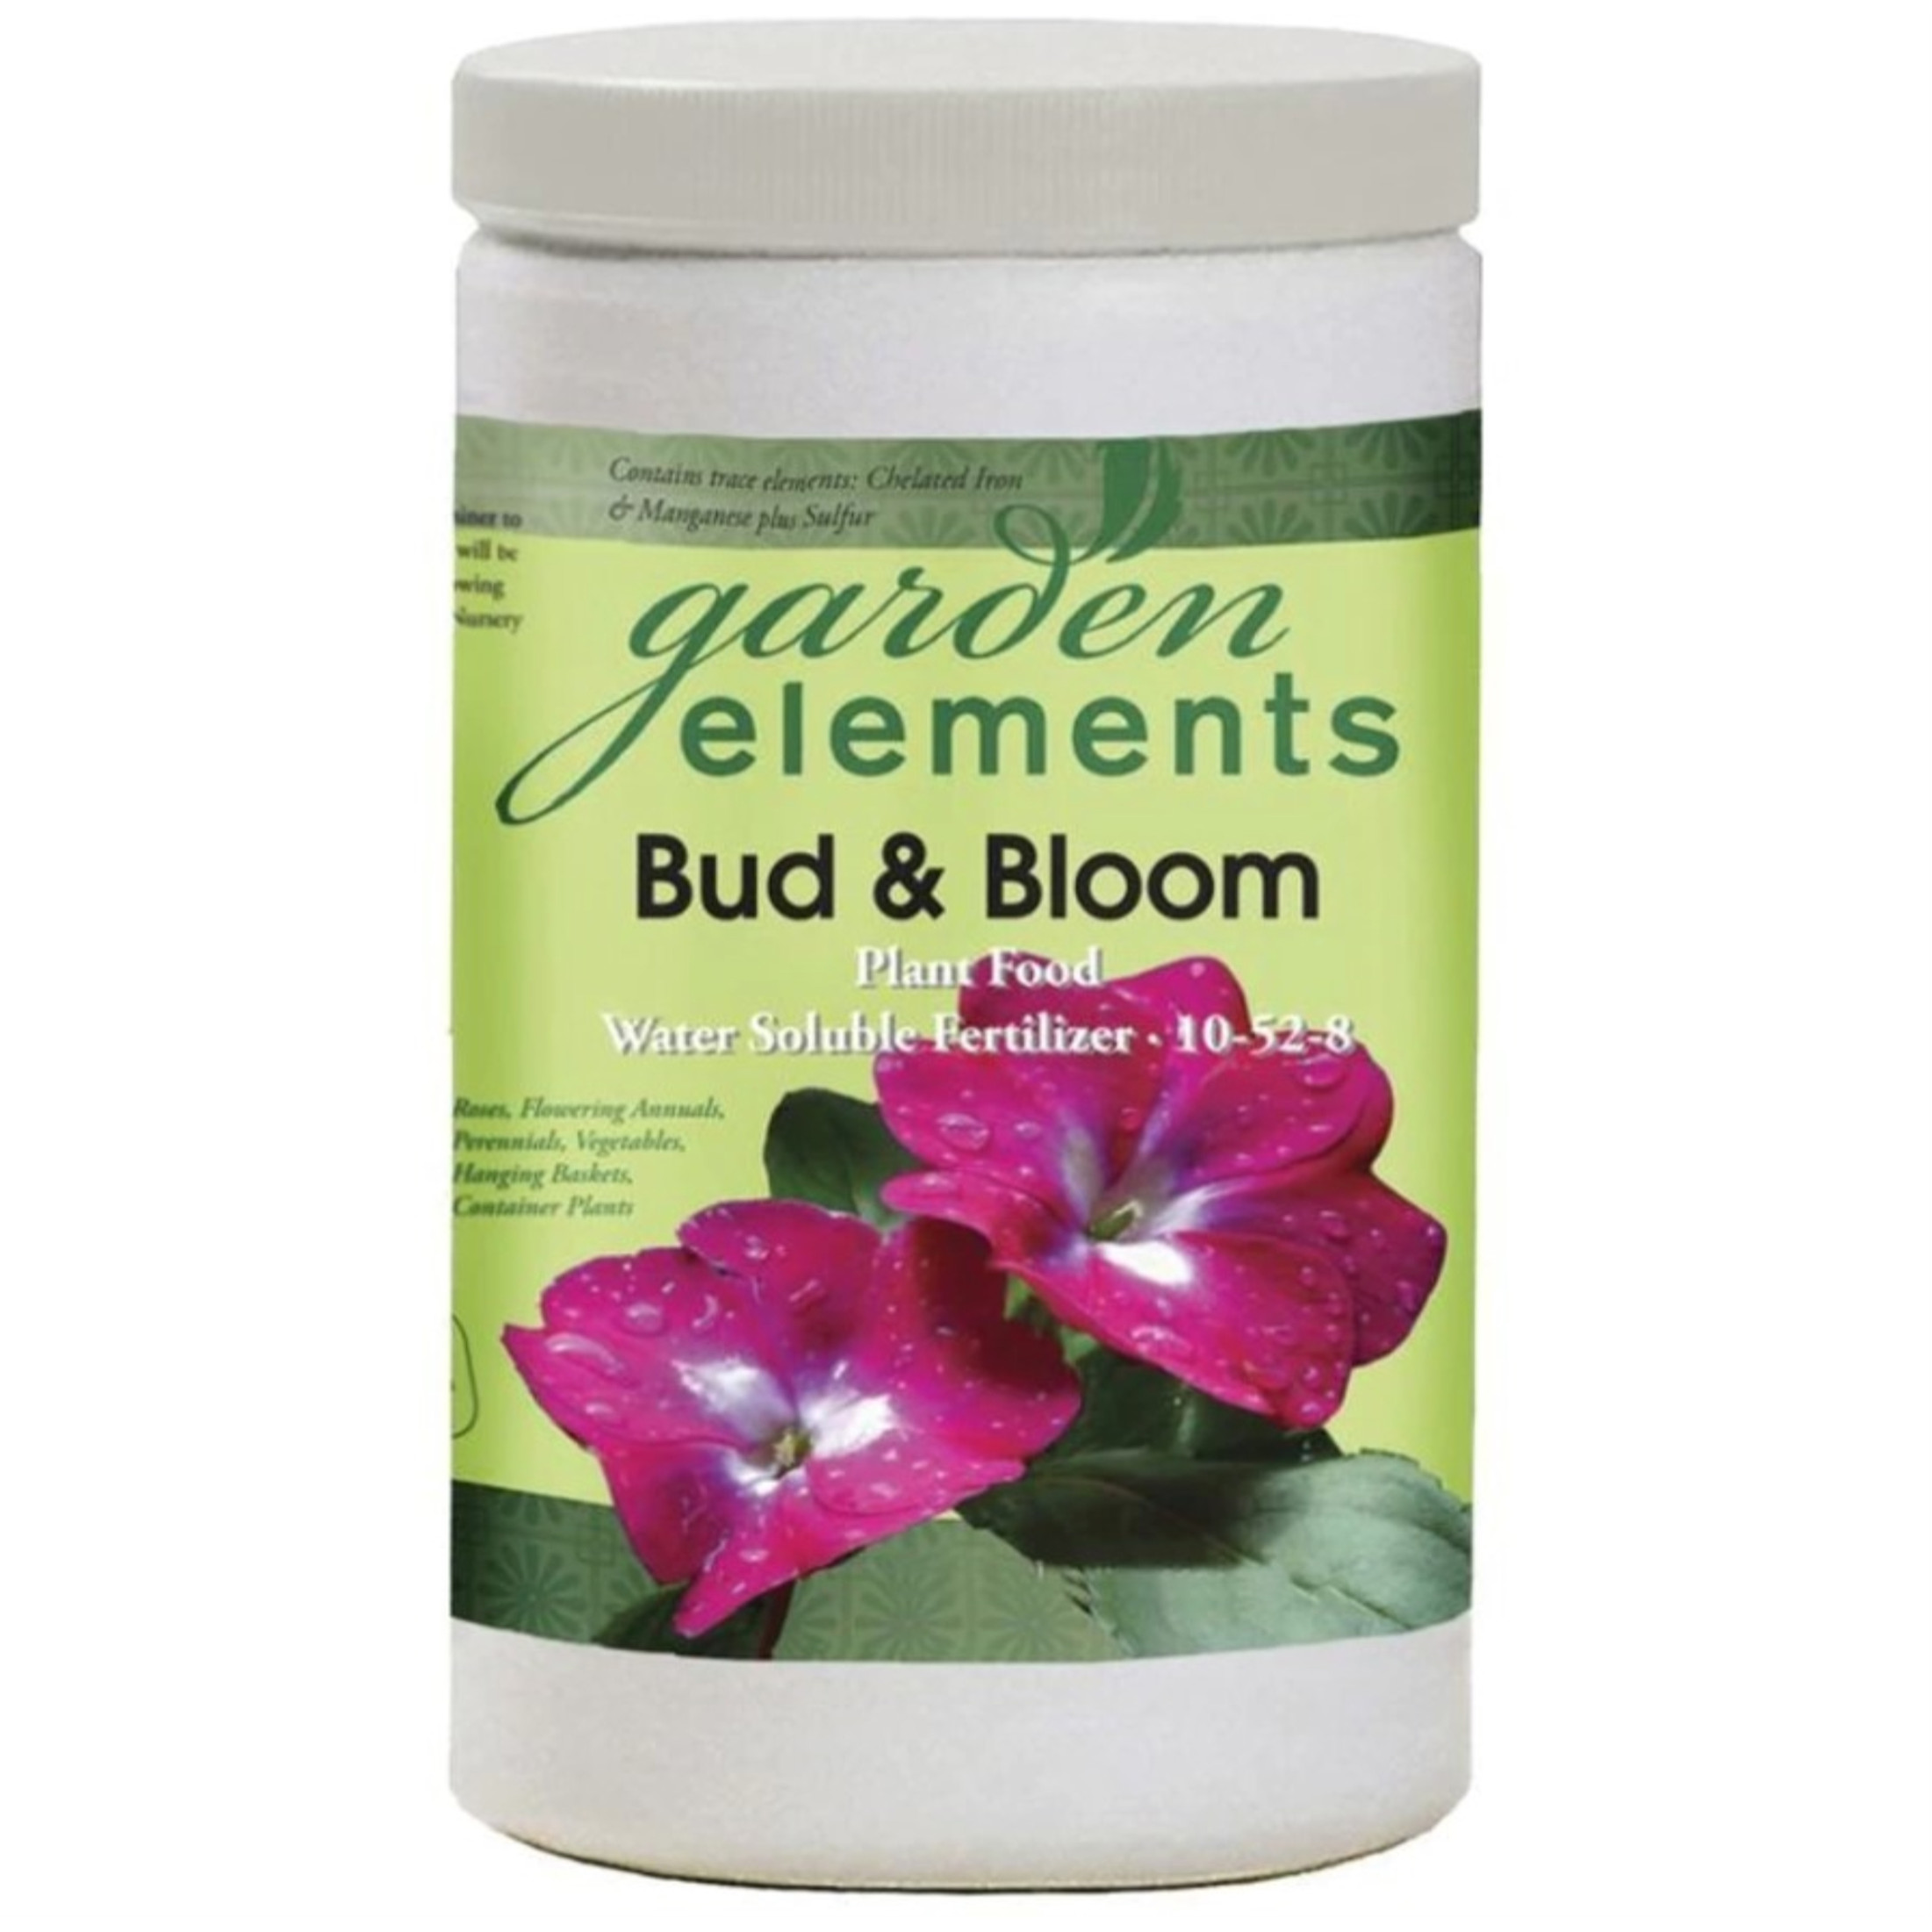 Garden Elements Bud & Bloom, 10-52-8 Water Soluble Plant Food